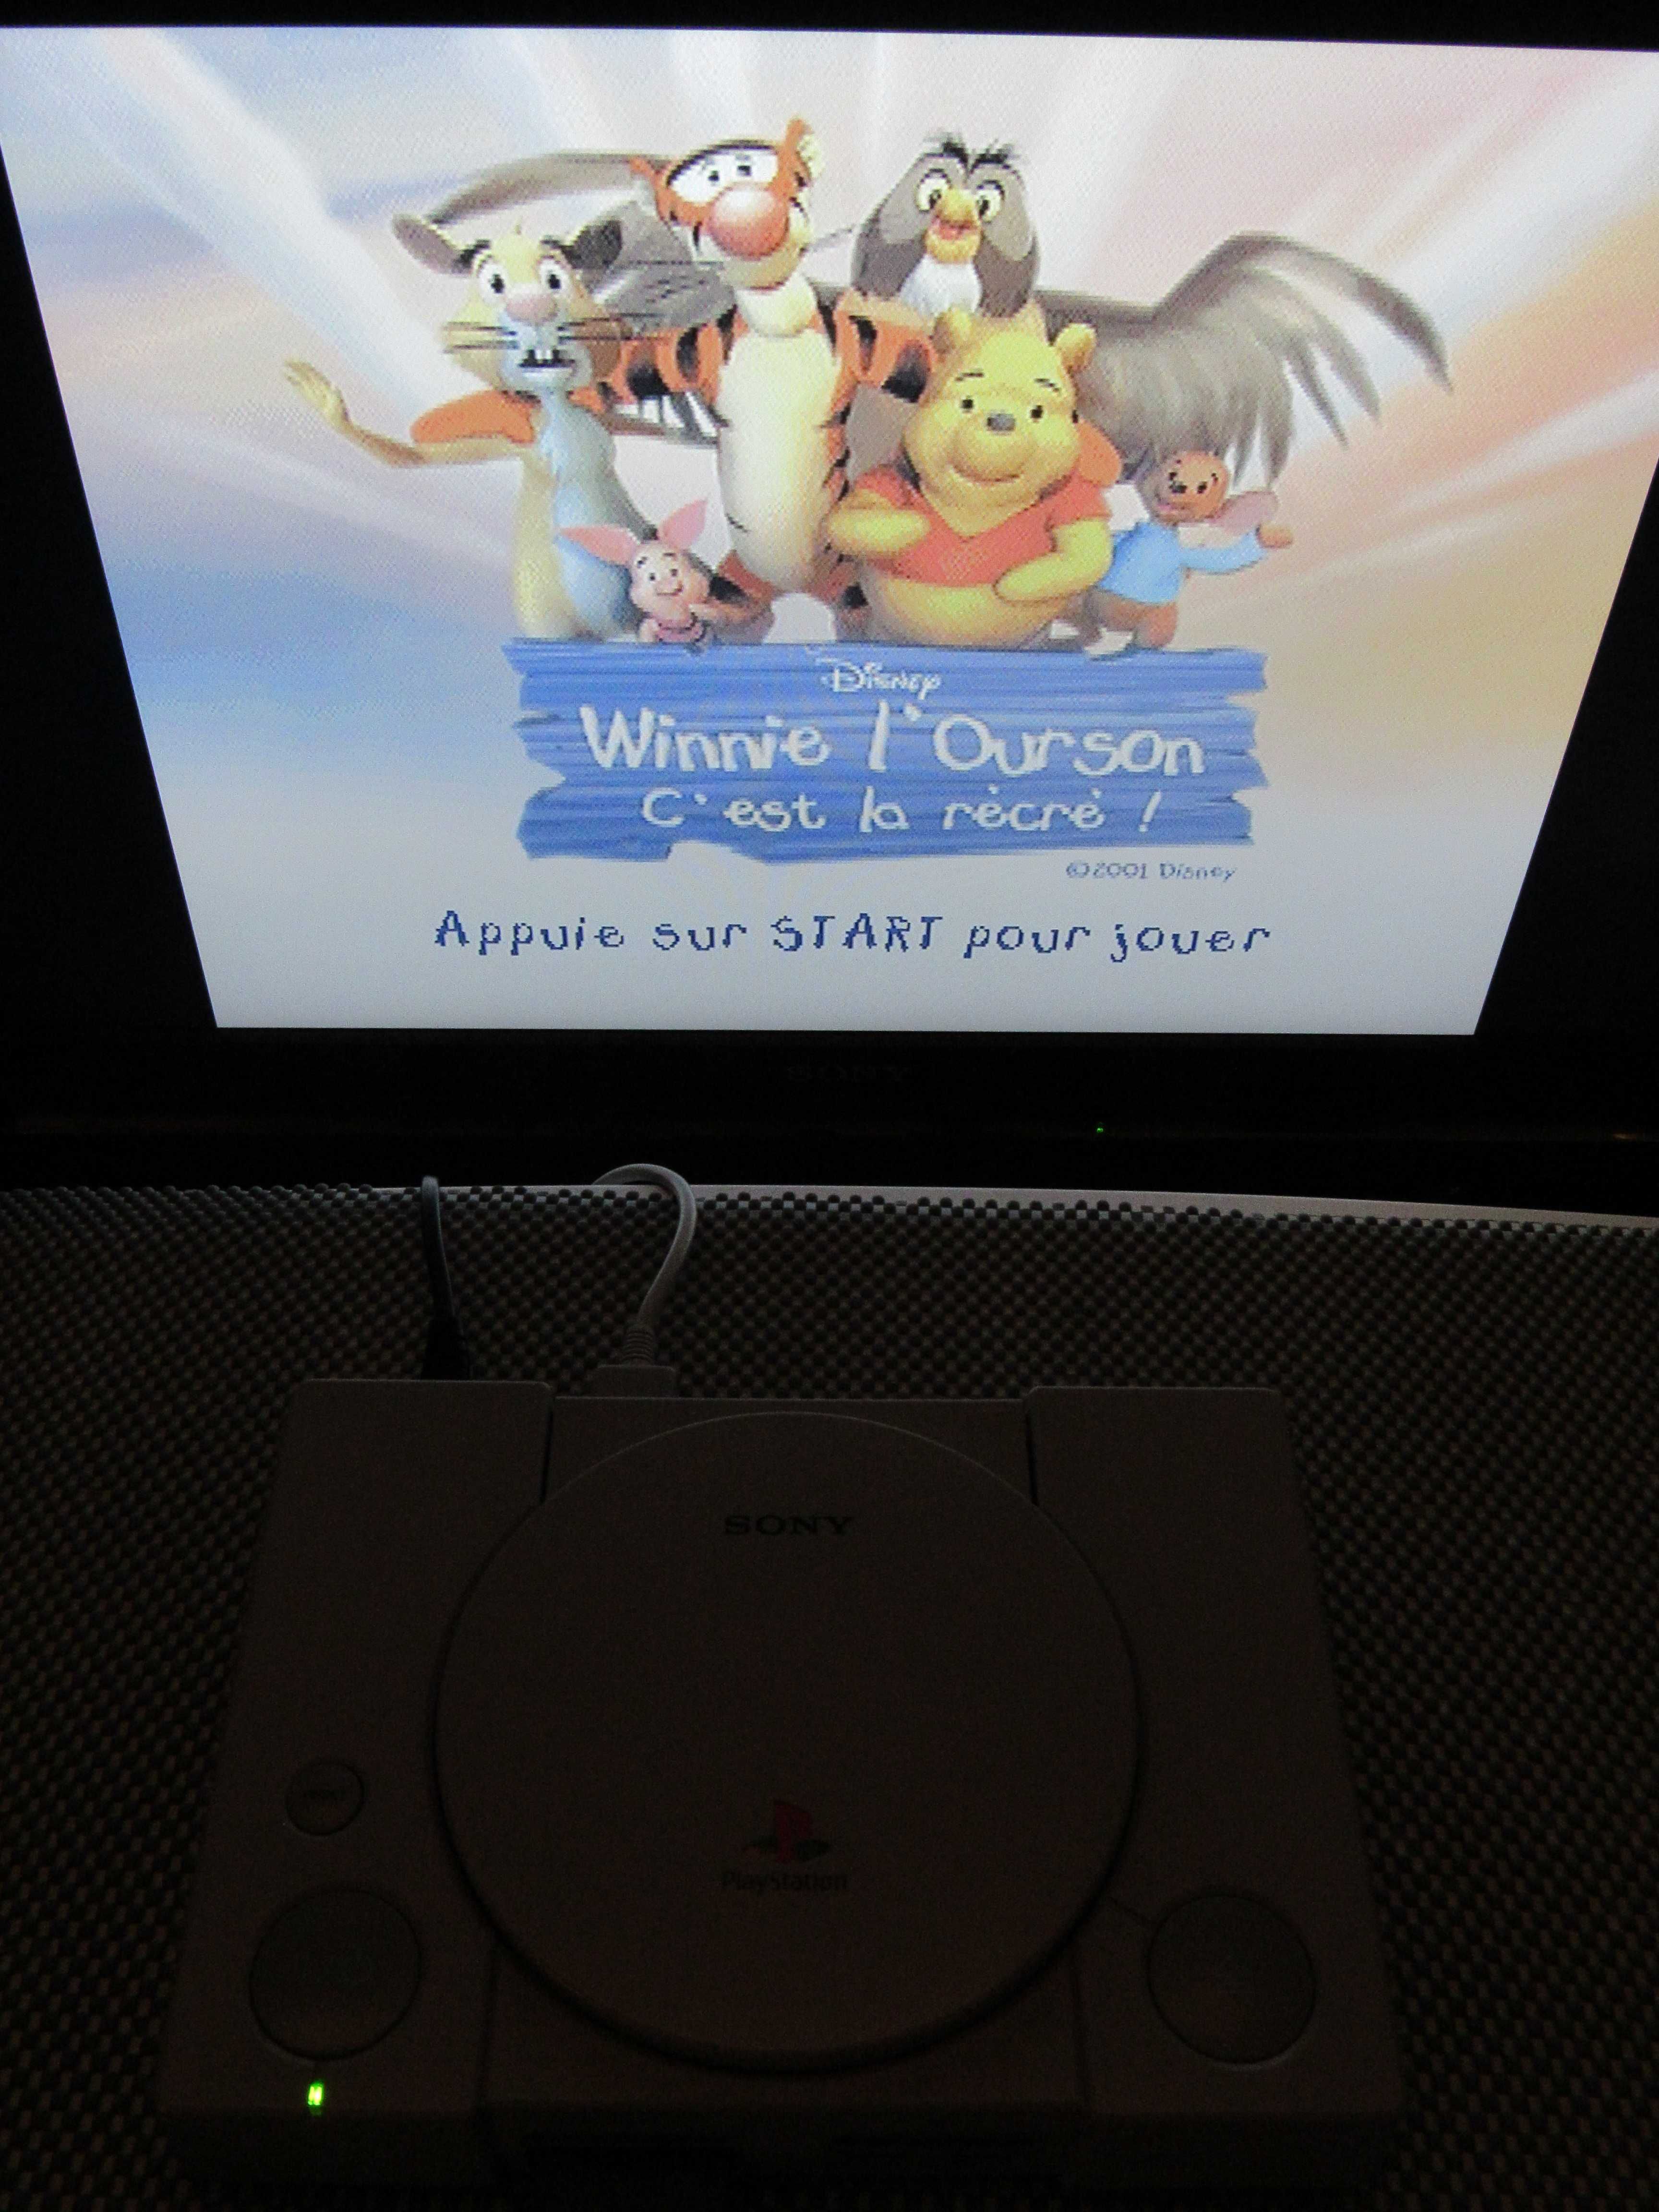 Jogo Playstation PS1 PSX PSOne Winnie the Pooh completo